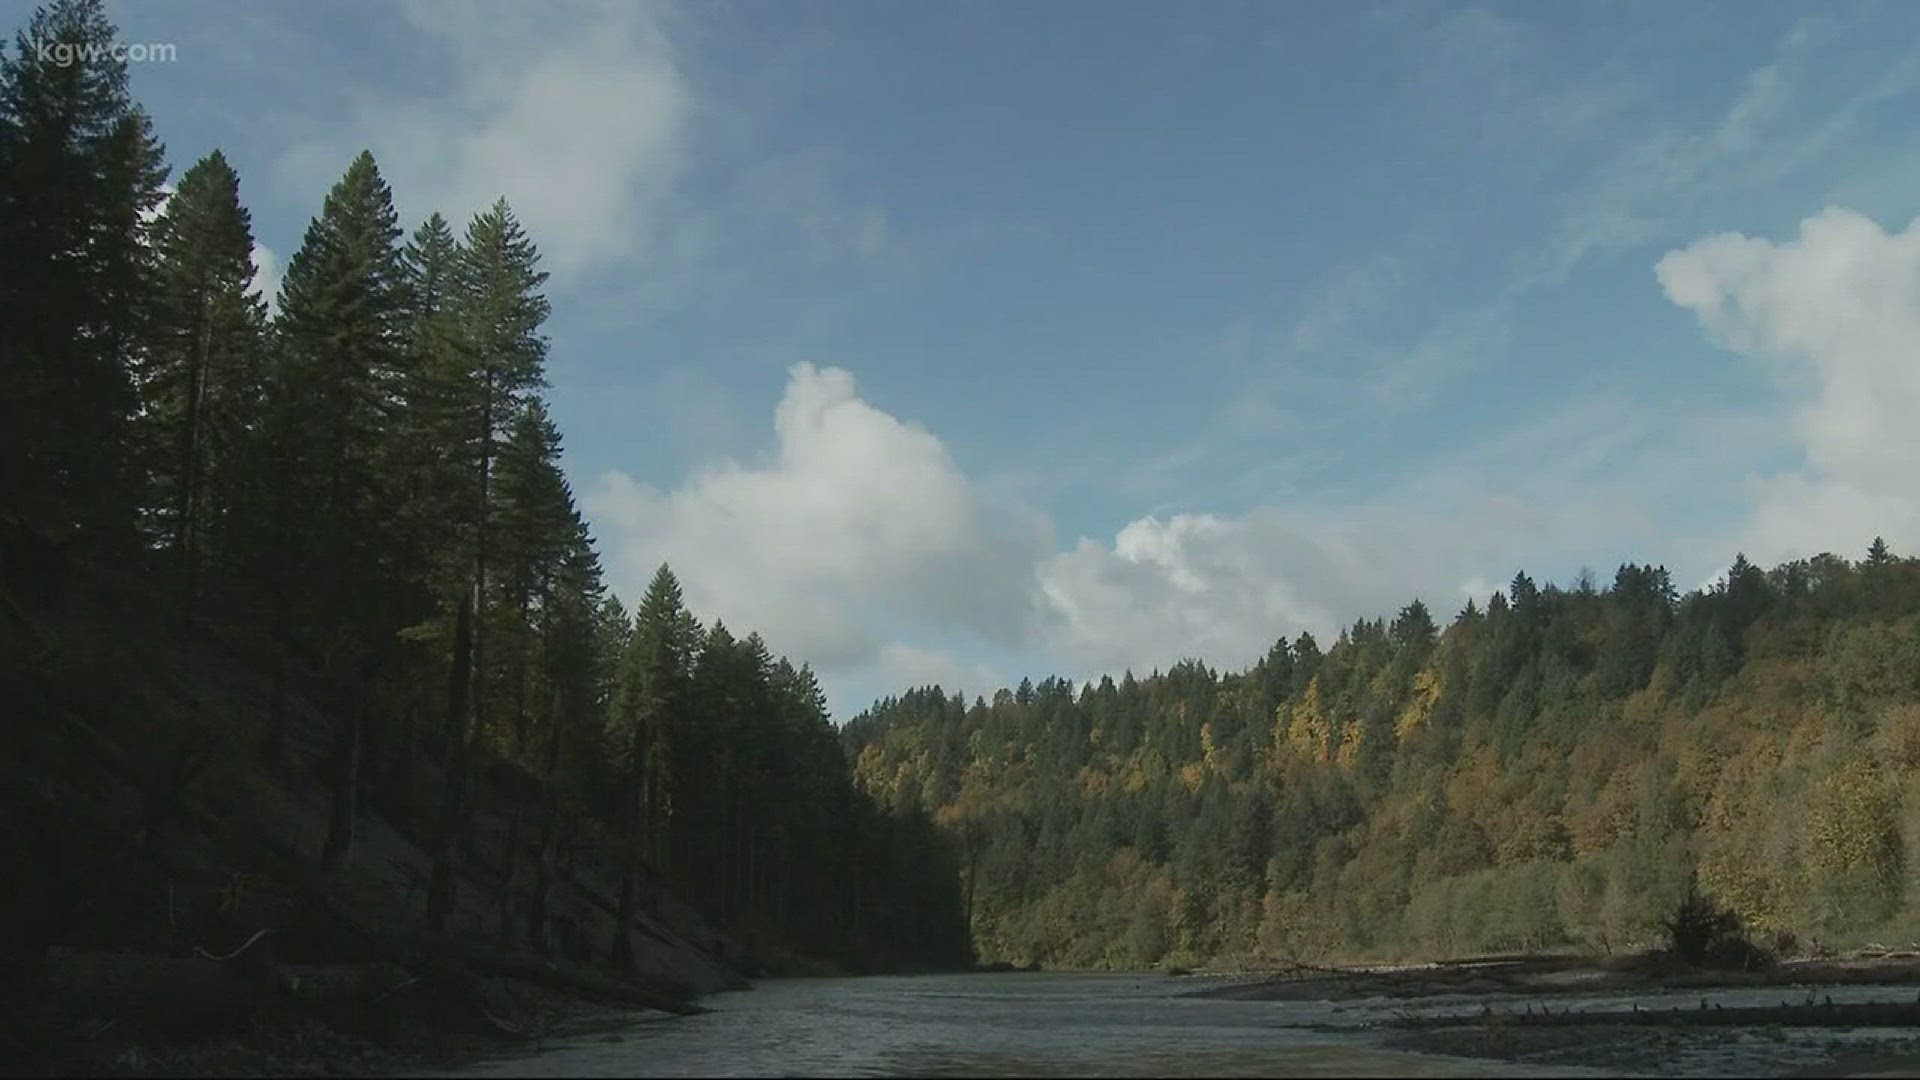 Grant's Getaways: Oxbow On The Sandy River